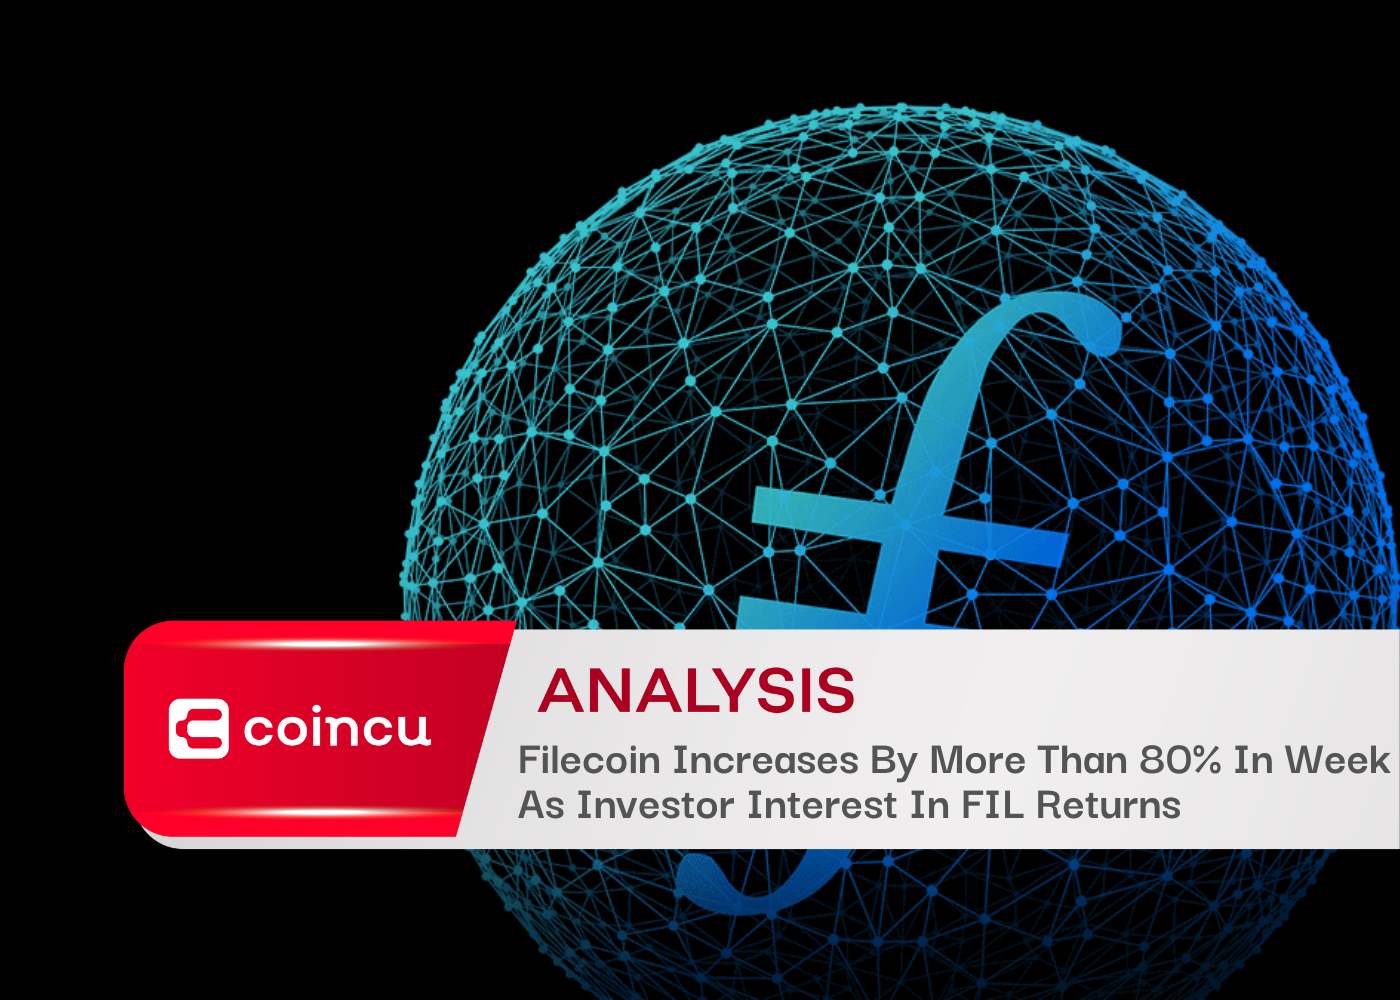 Filecoin Increases By More Than 80 In Week